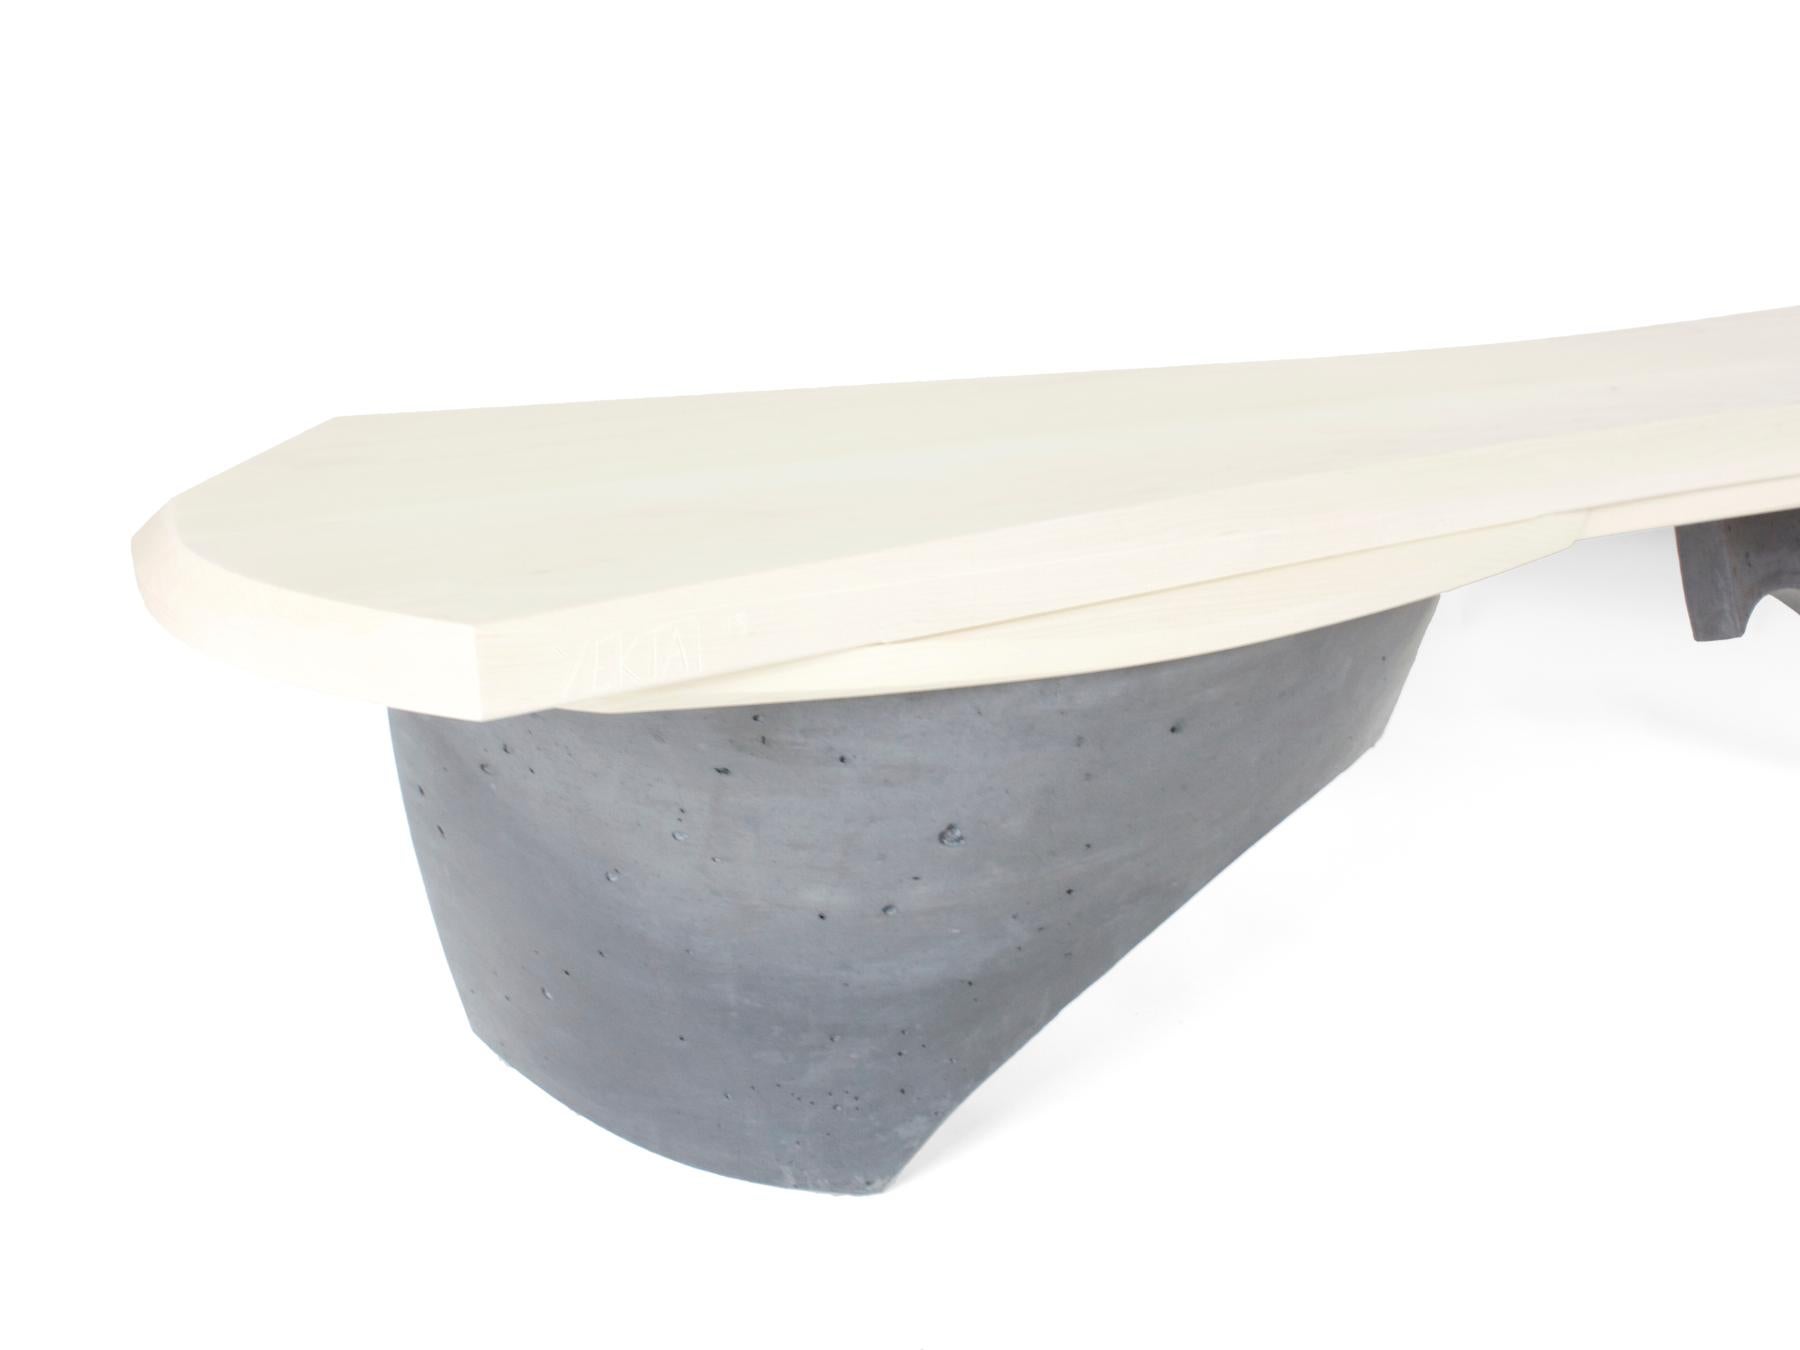 Presented in bleached maple and charcoal colored cast concrete. This version is smaller than its bigger sibling but not a small bench by any means. This version measures 72” long and the castings could easily accommodate a seat a bit shorter and